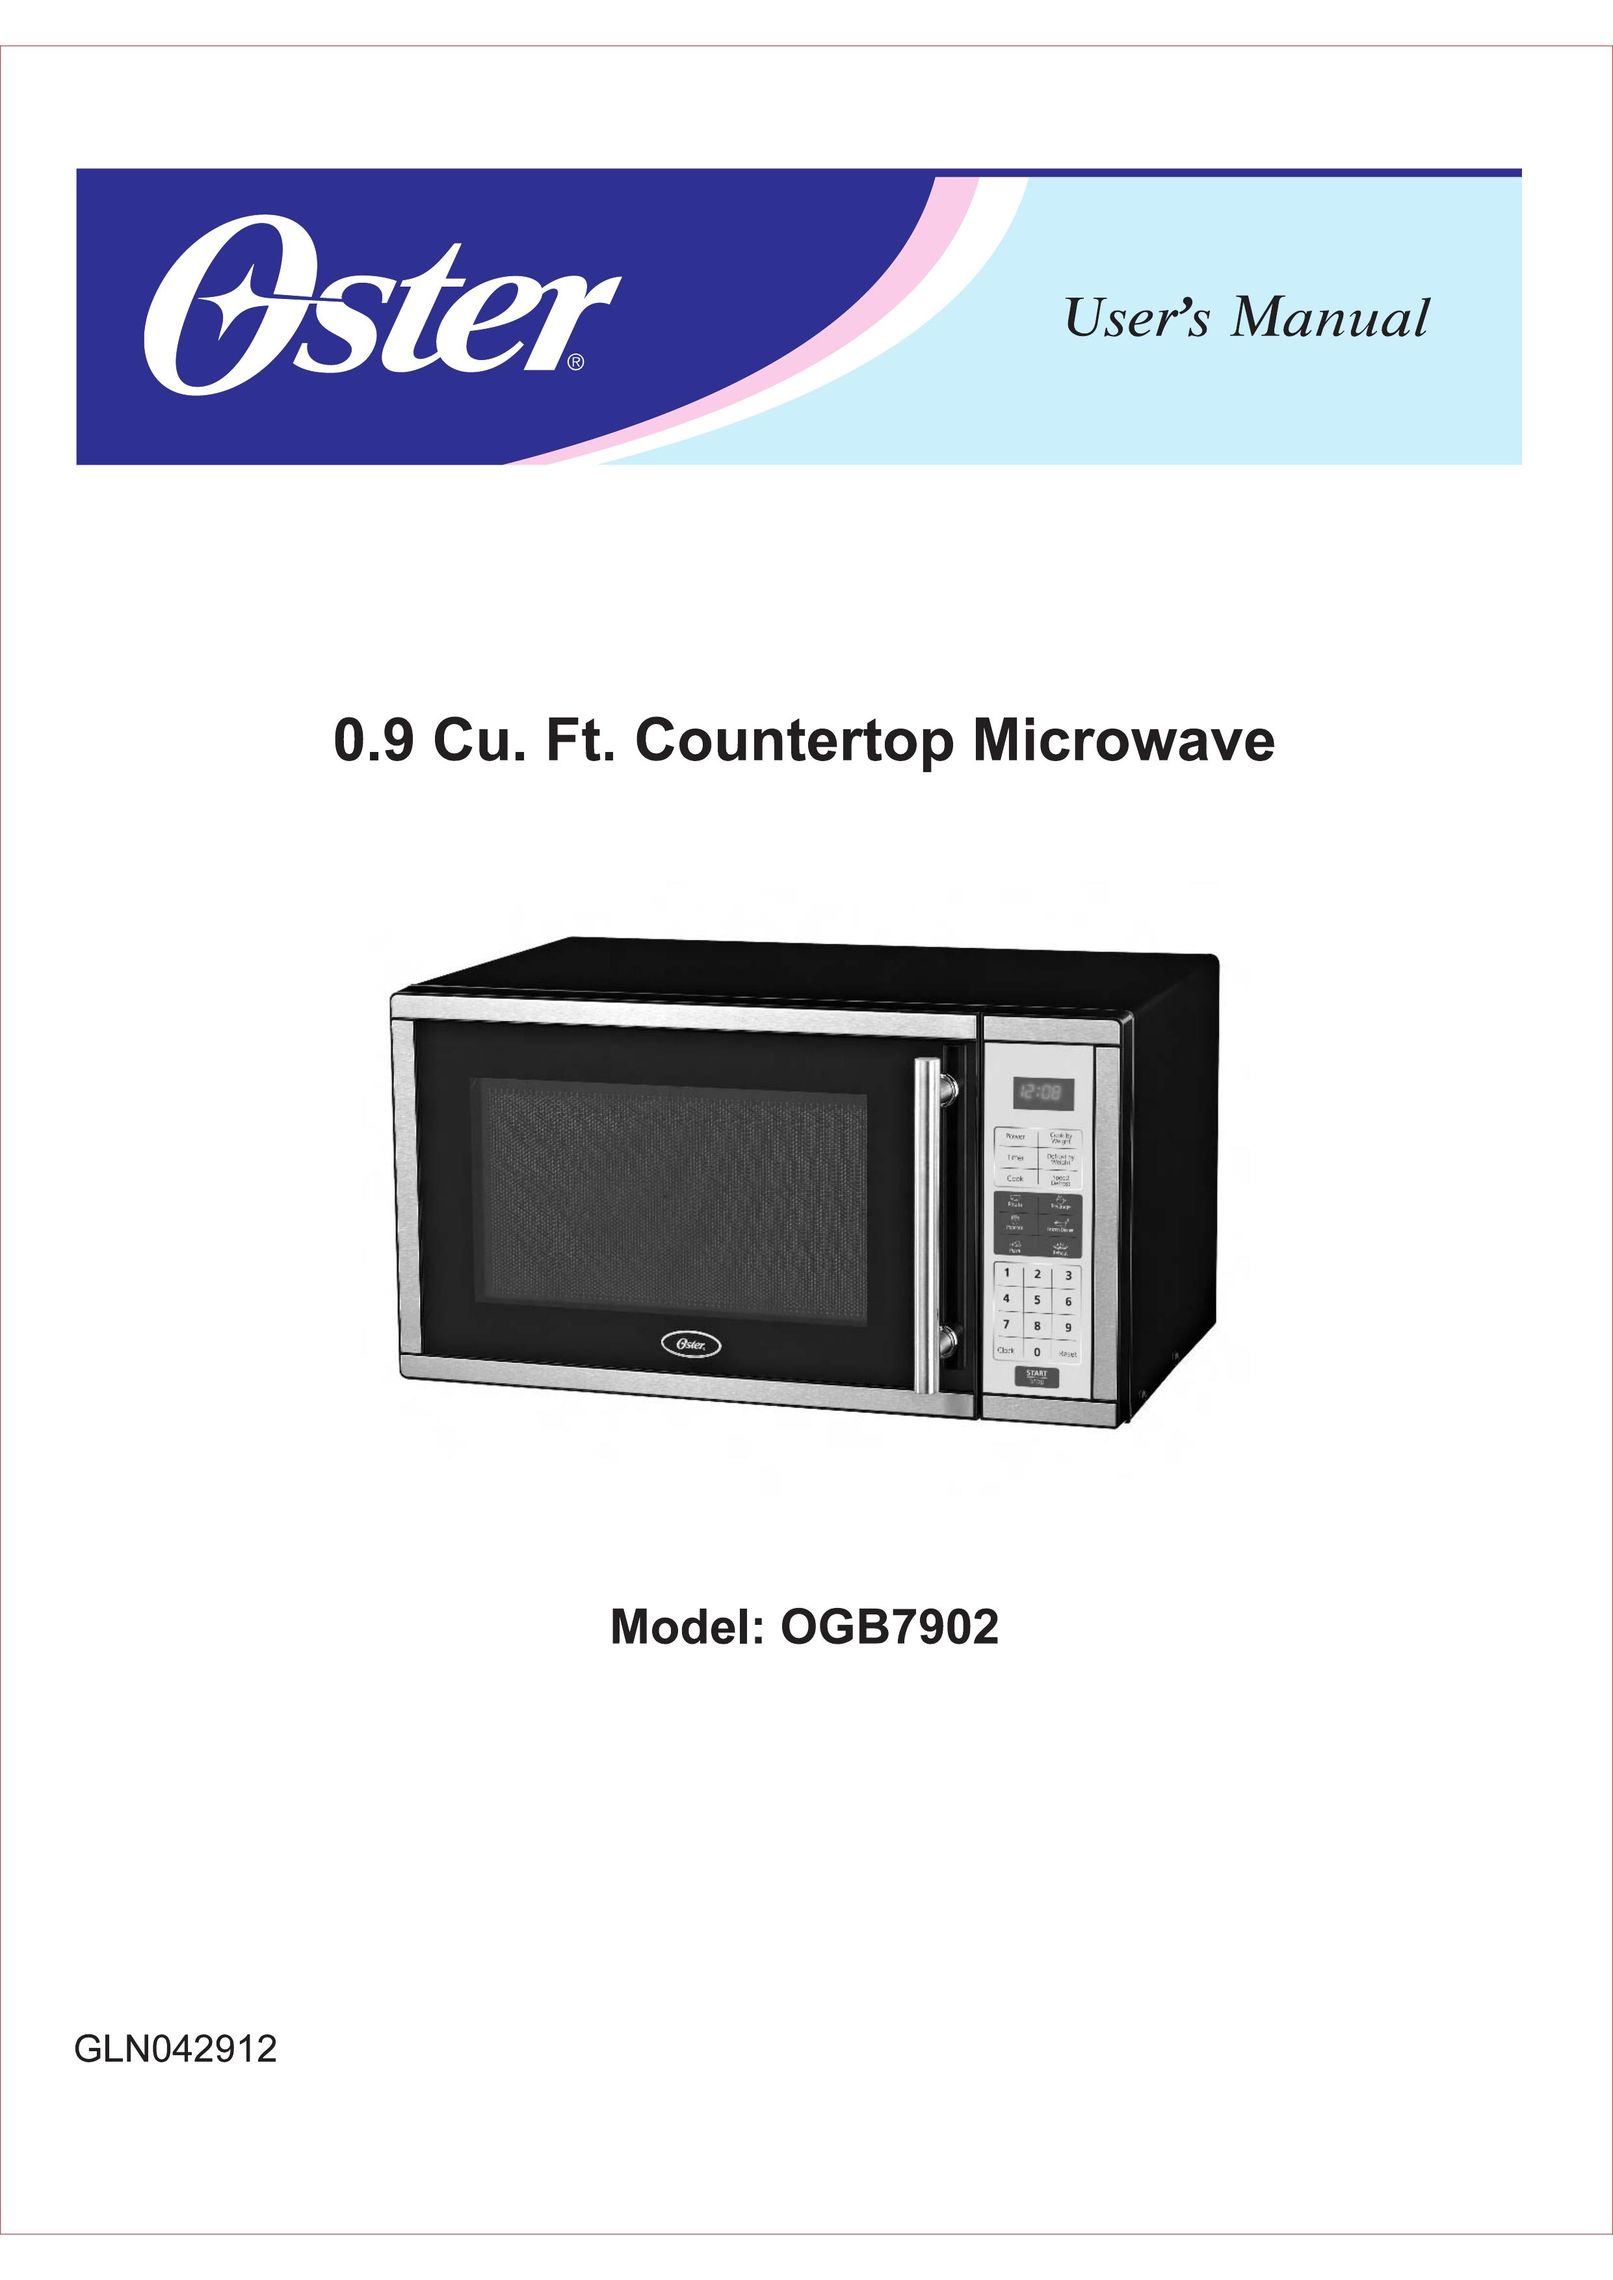 Oster OGB7902 Microwave Oven User Manual